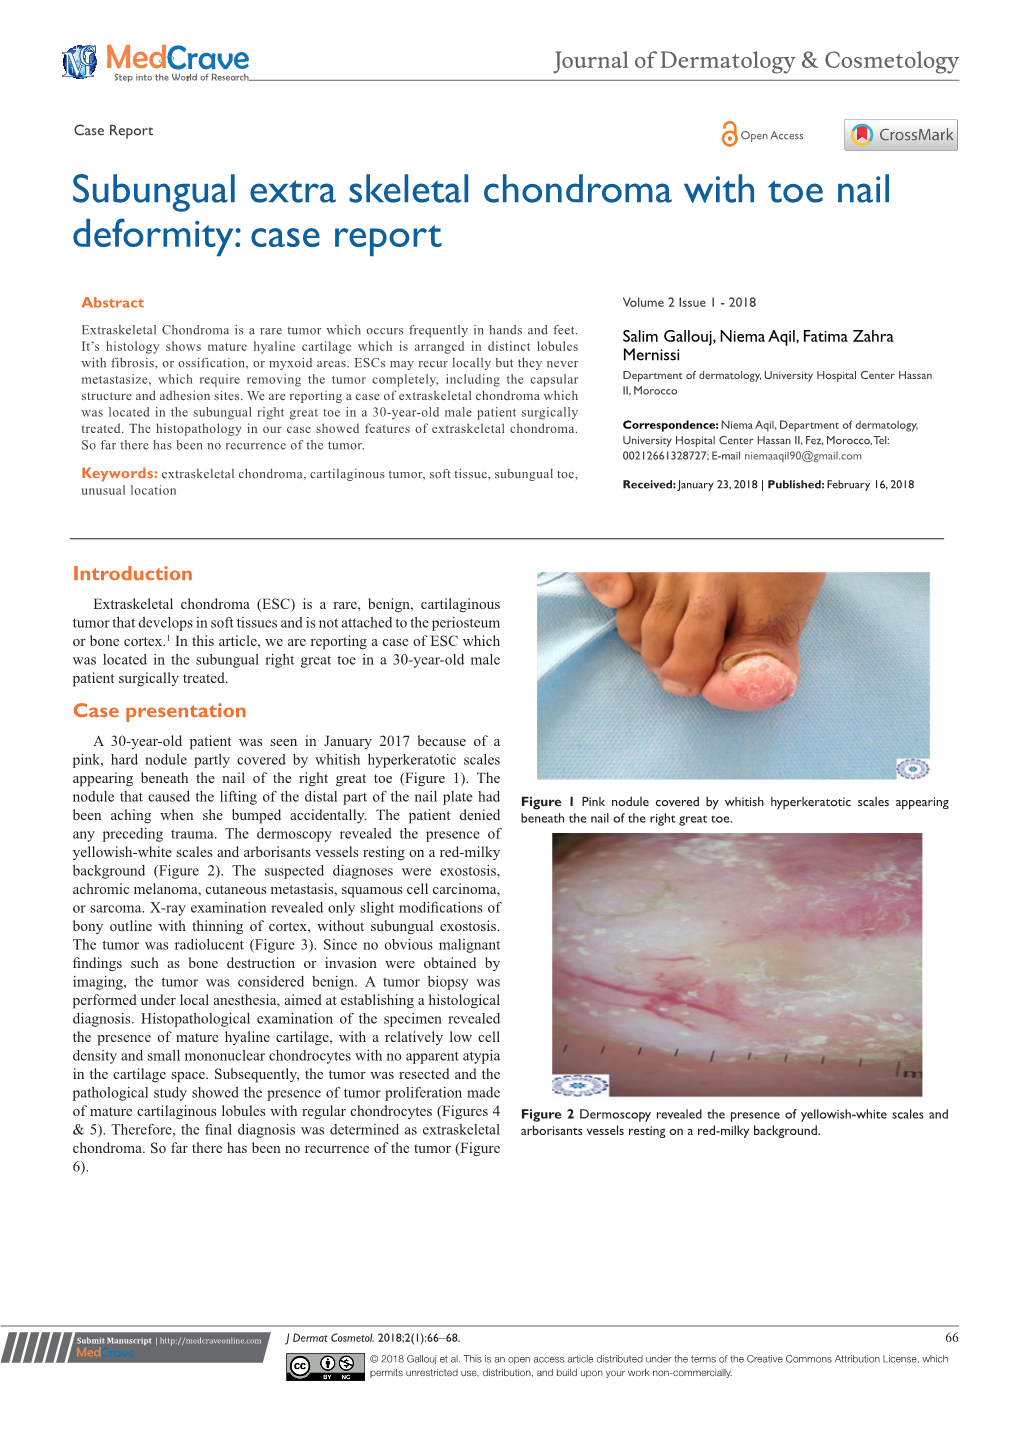 Subungual Extra Skeletal Chondroma with Toe Nail Deformity: Case Report